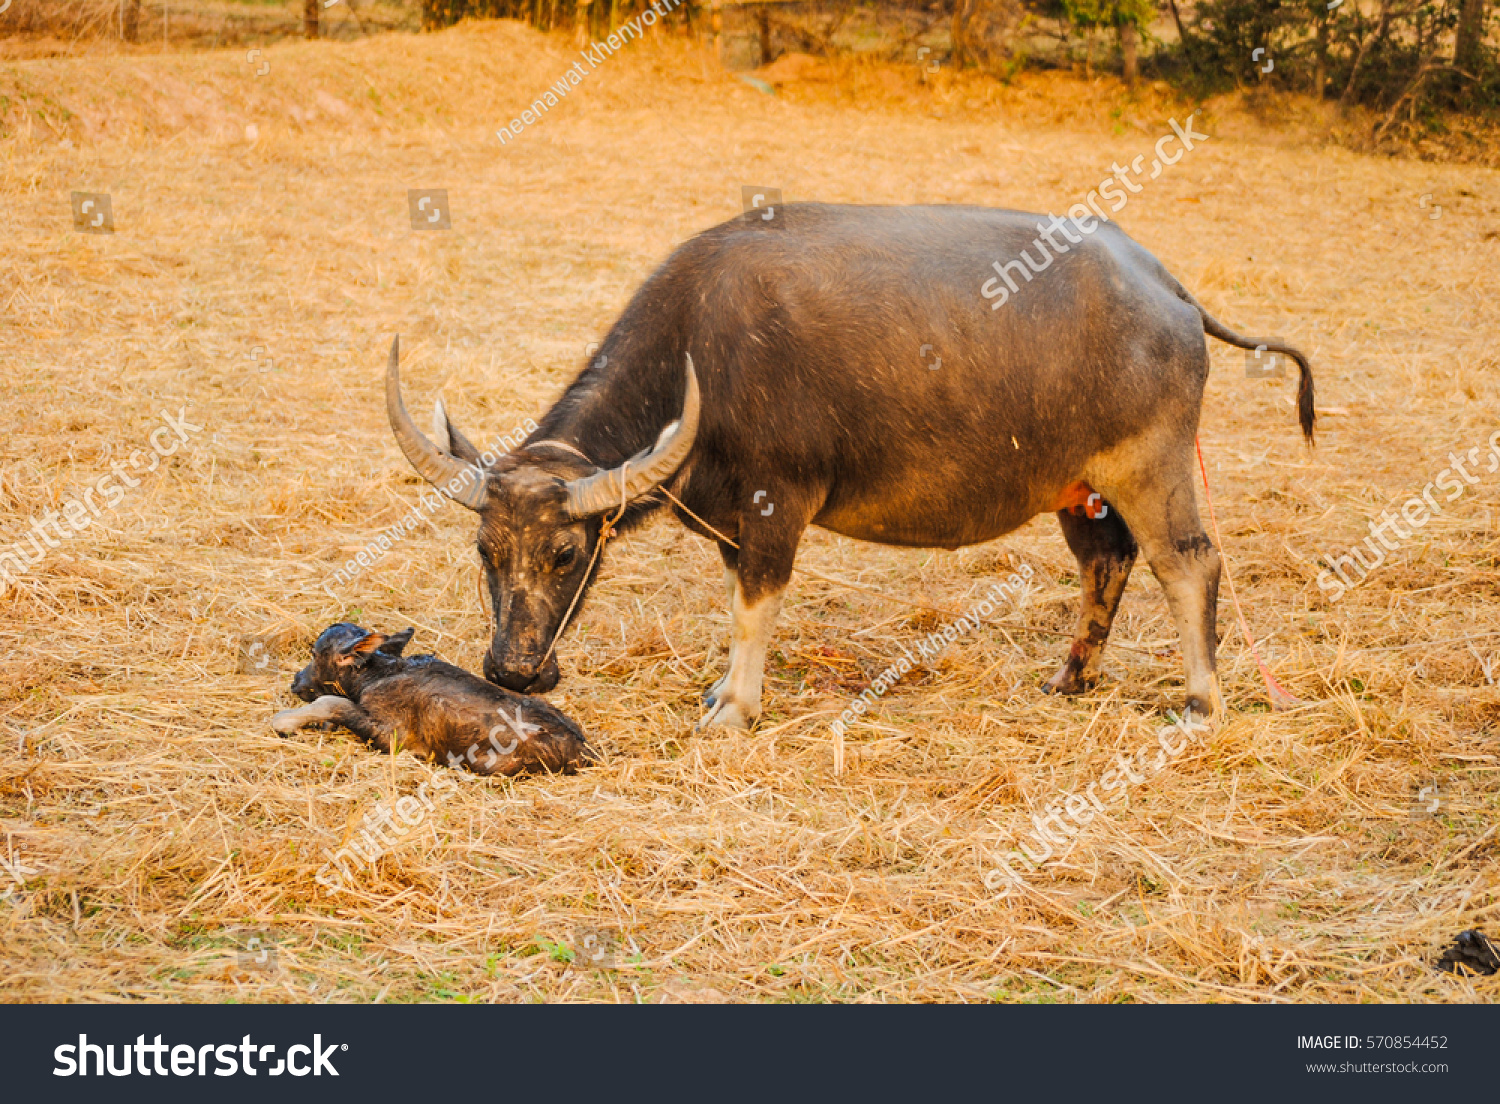 Asian Buffalo Giving Looking After Stock Photo (Edit Now) 570854452